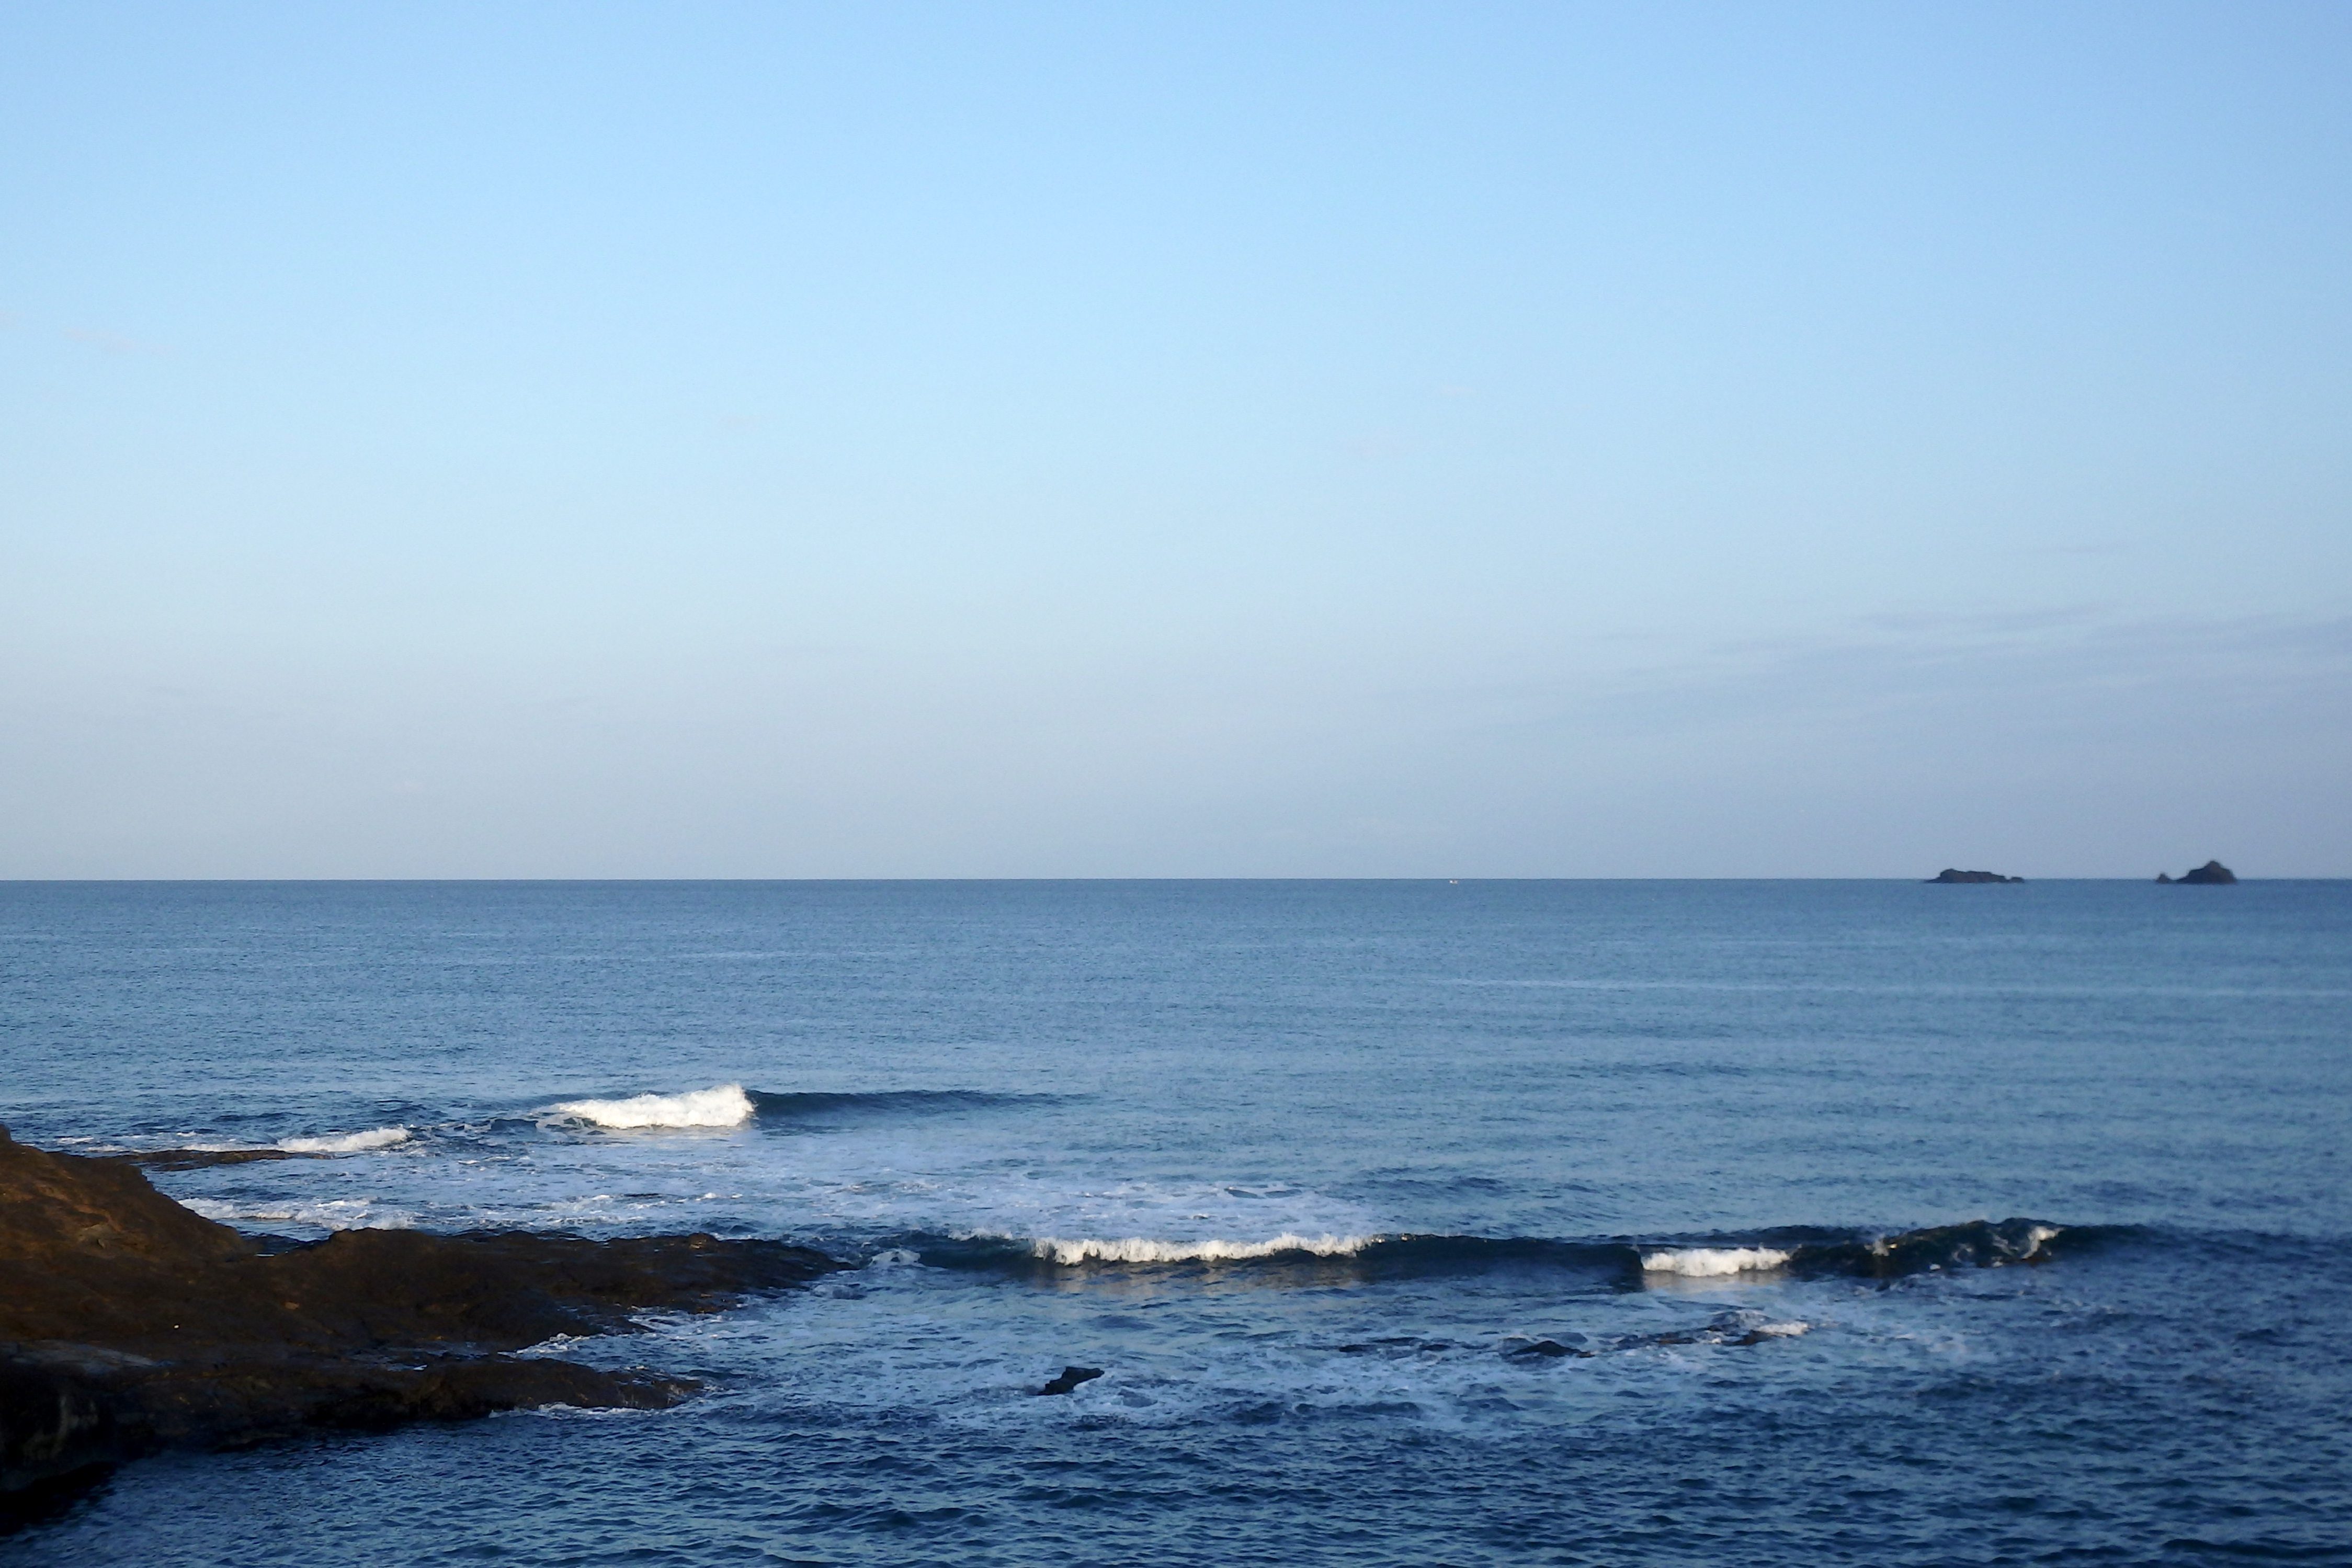 Surf Report for Saturday 23rd April 2016